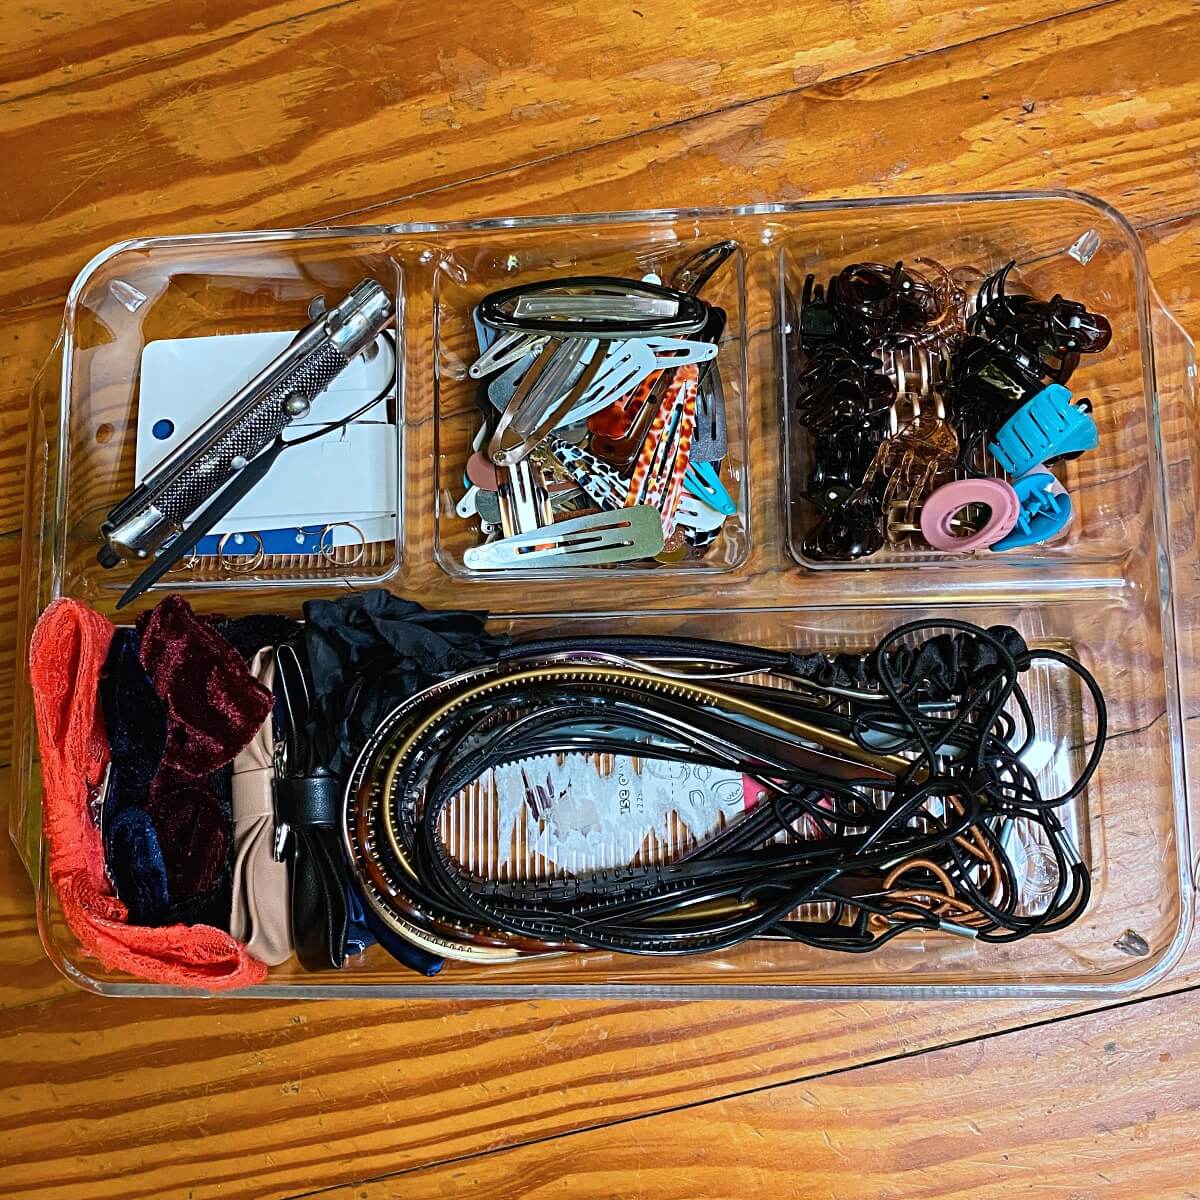 How To Organize Hair Accessories In A Drawer